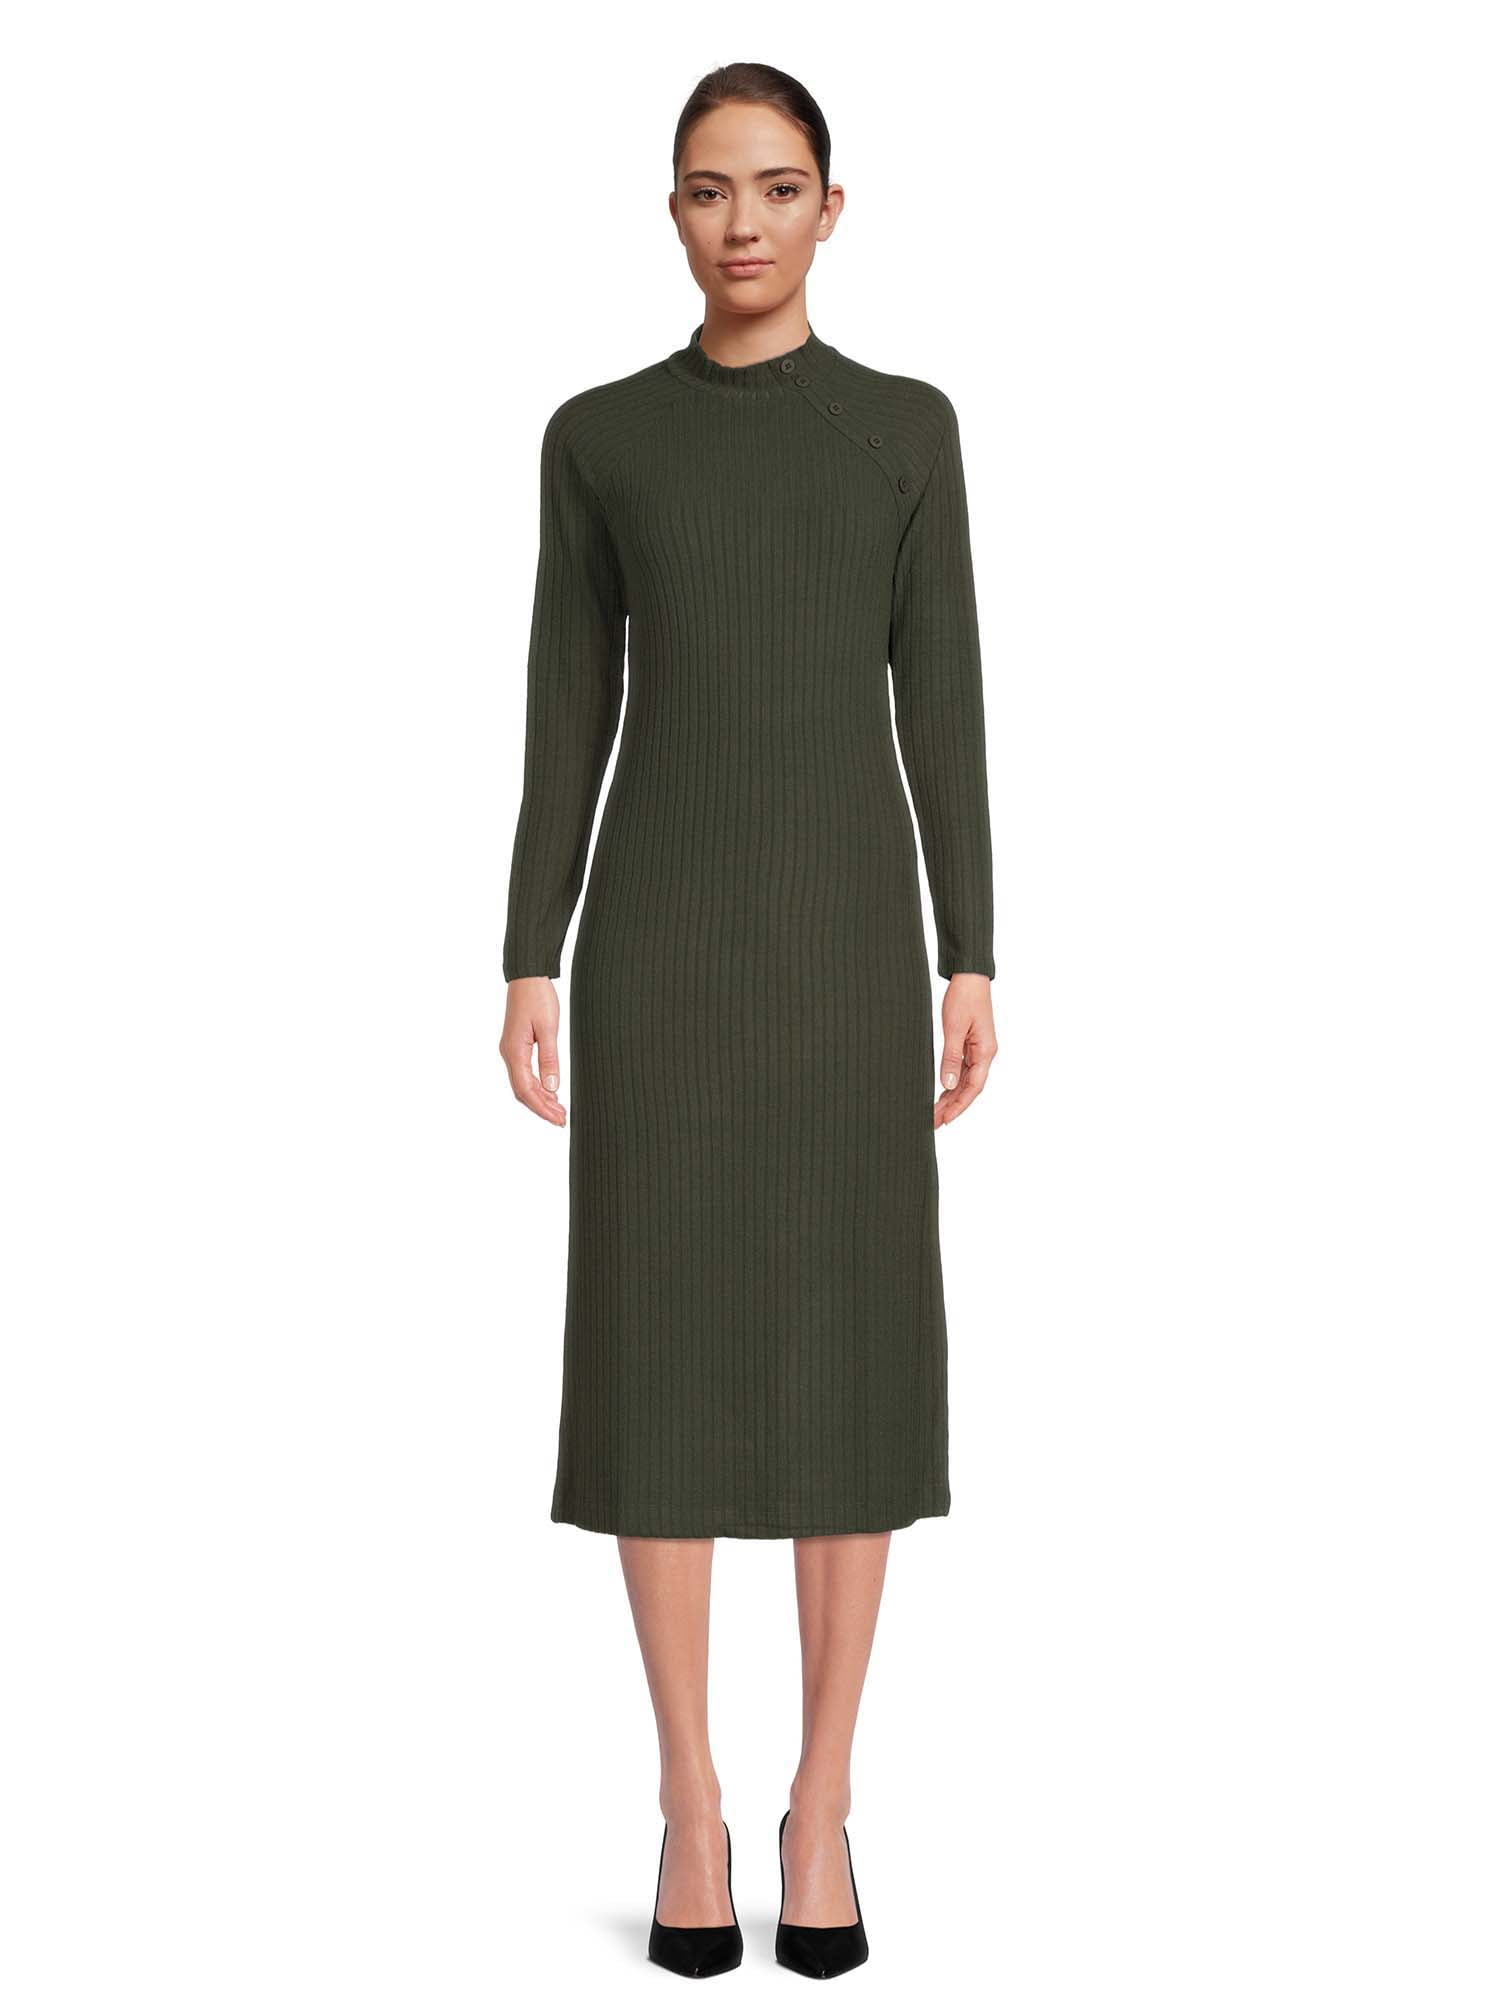 Time and Tru Women's Rib Knit Dress with Long Sleeves